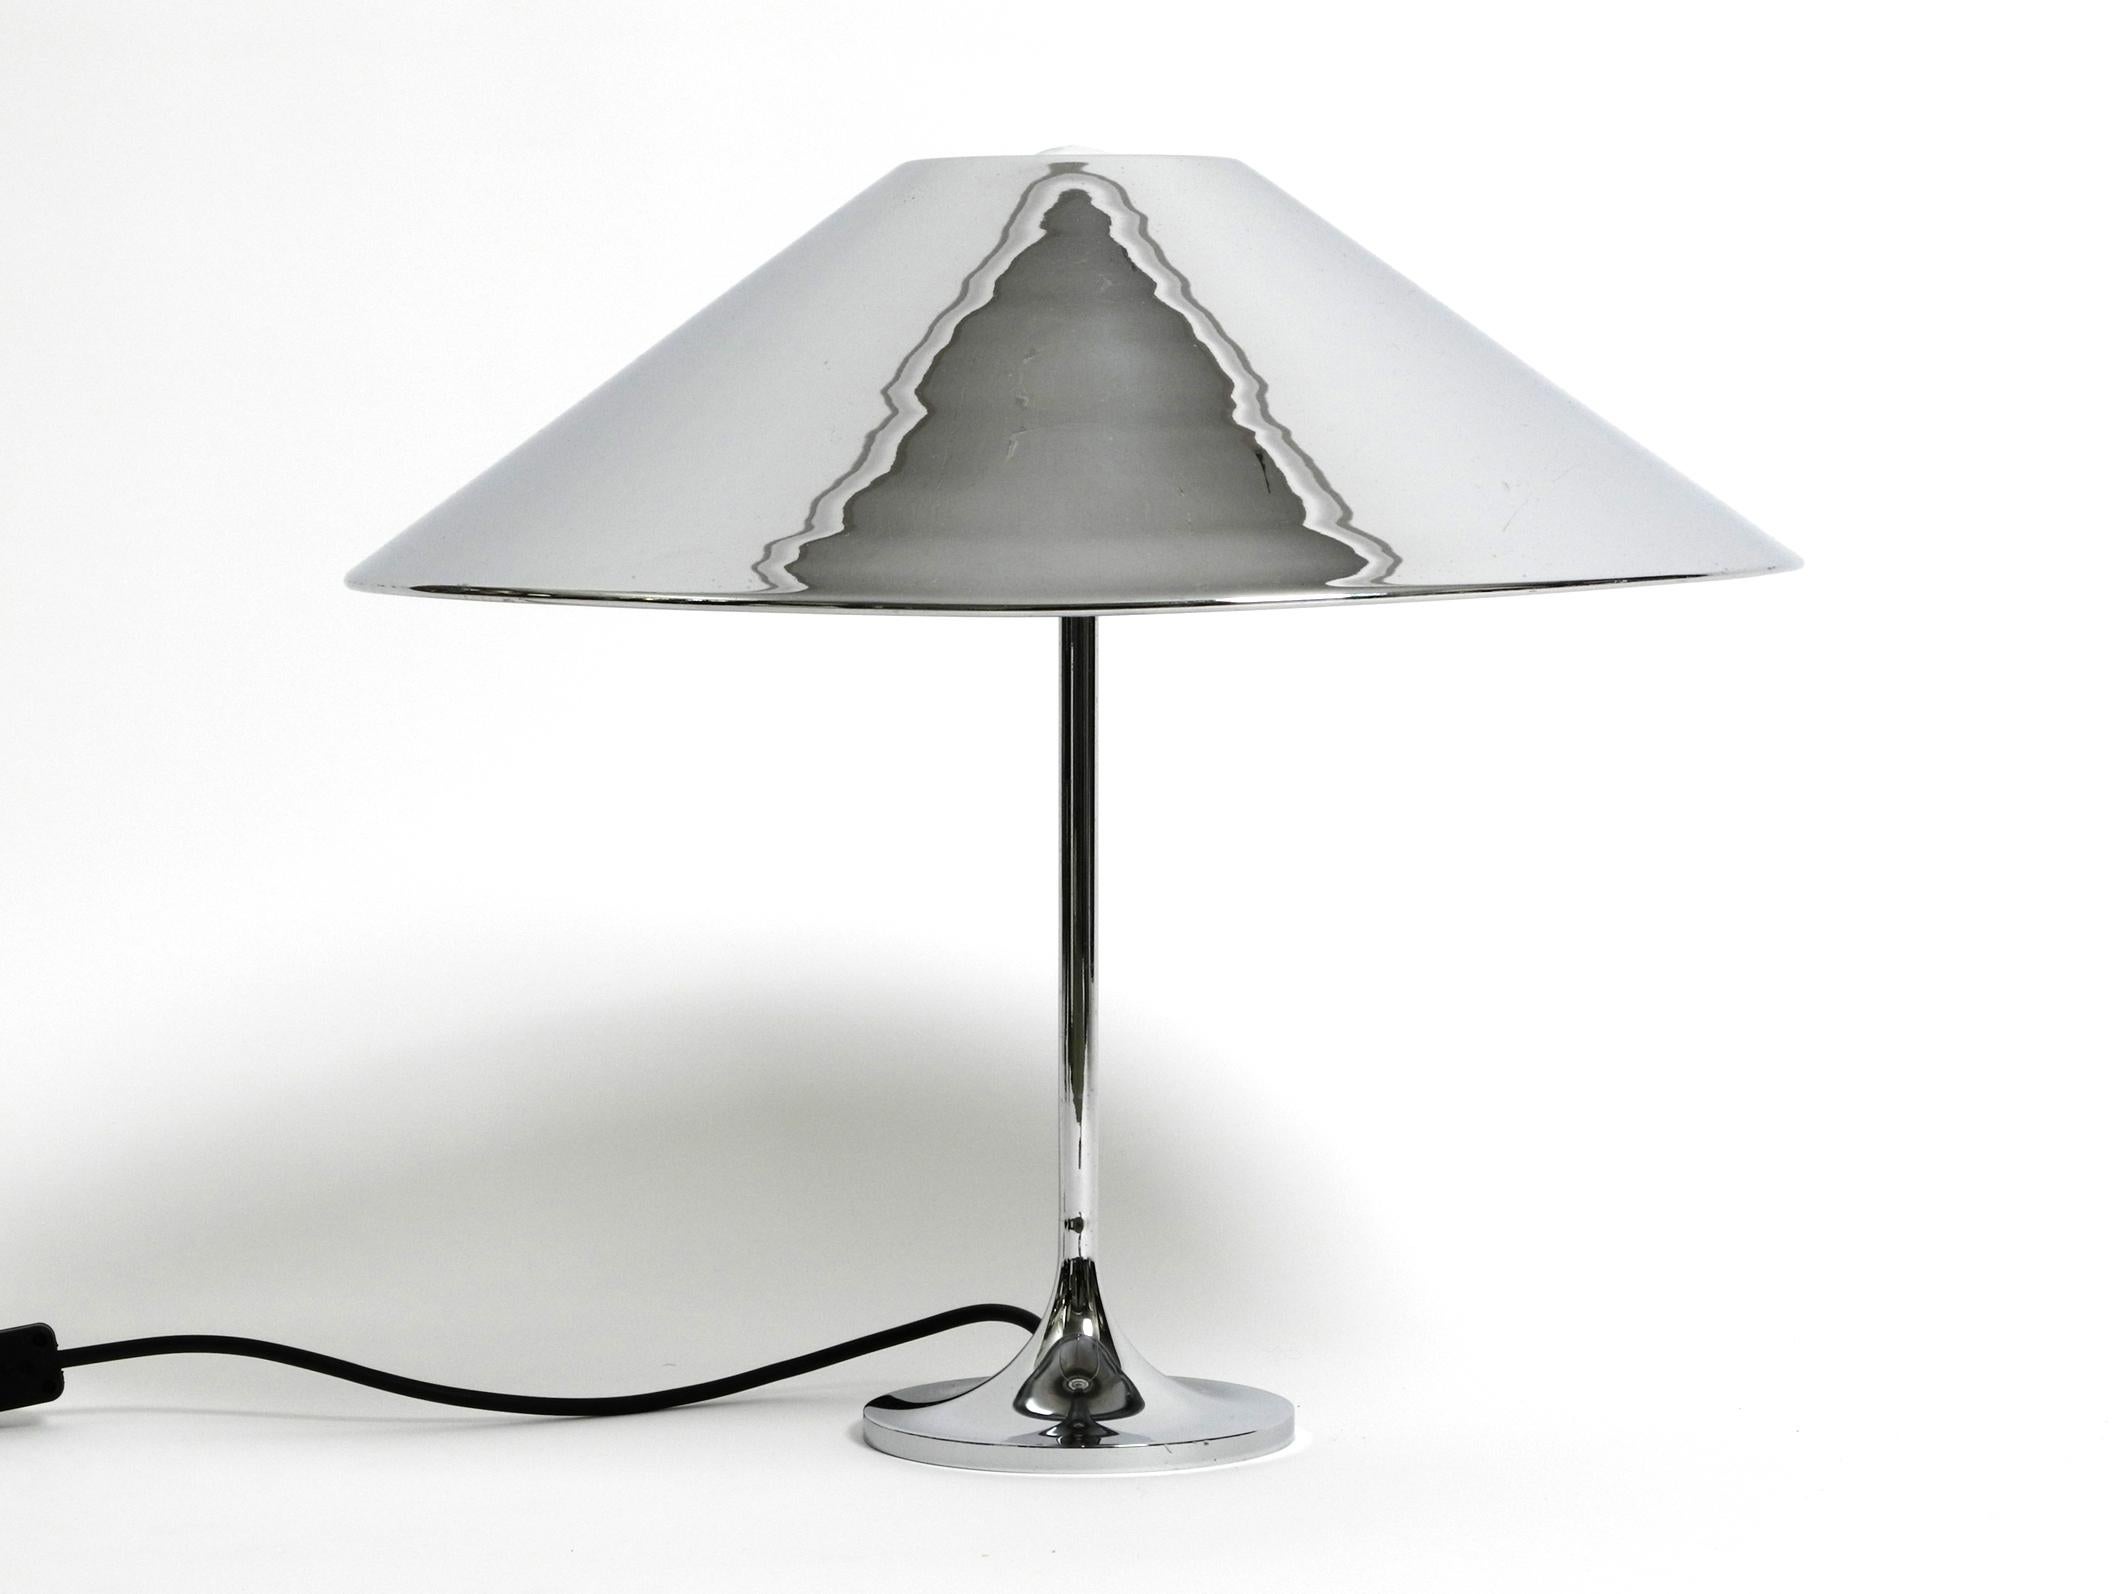 Large heavy 1970's metal chrome table lamp with metal shade. Timeless high quality design.
The foot and neck are made of chrome-plated iron, the shade is made of sheet steel and is also chrome-plated.
The shade is simply placed on the three metal